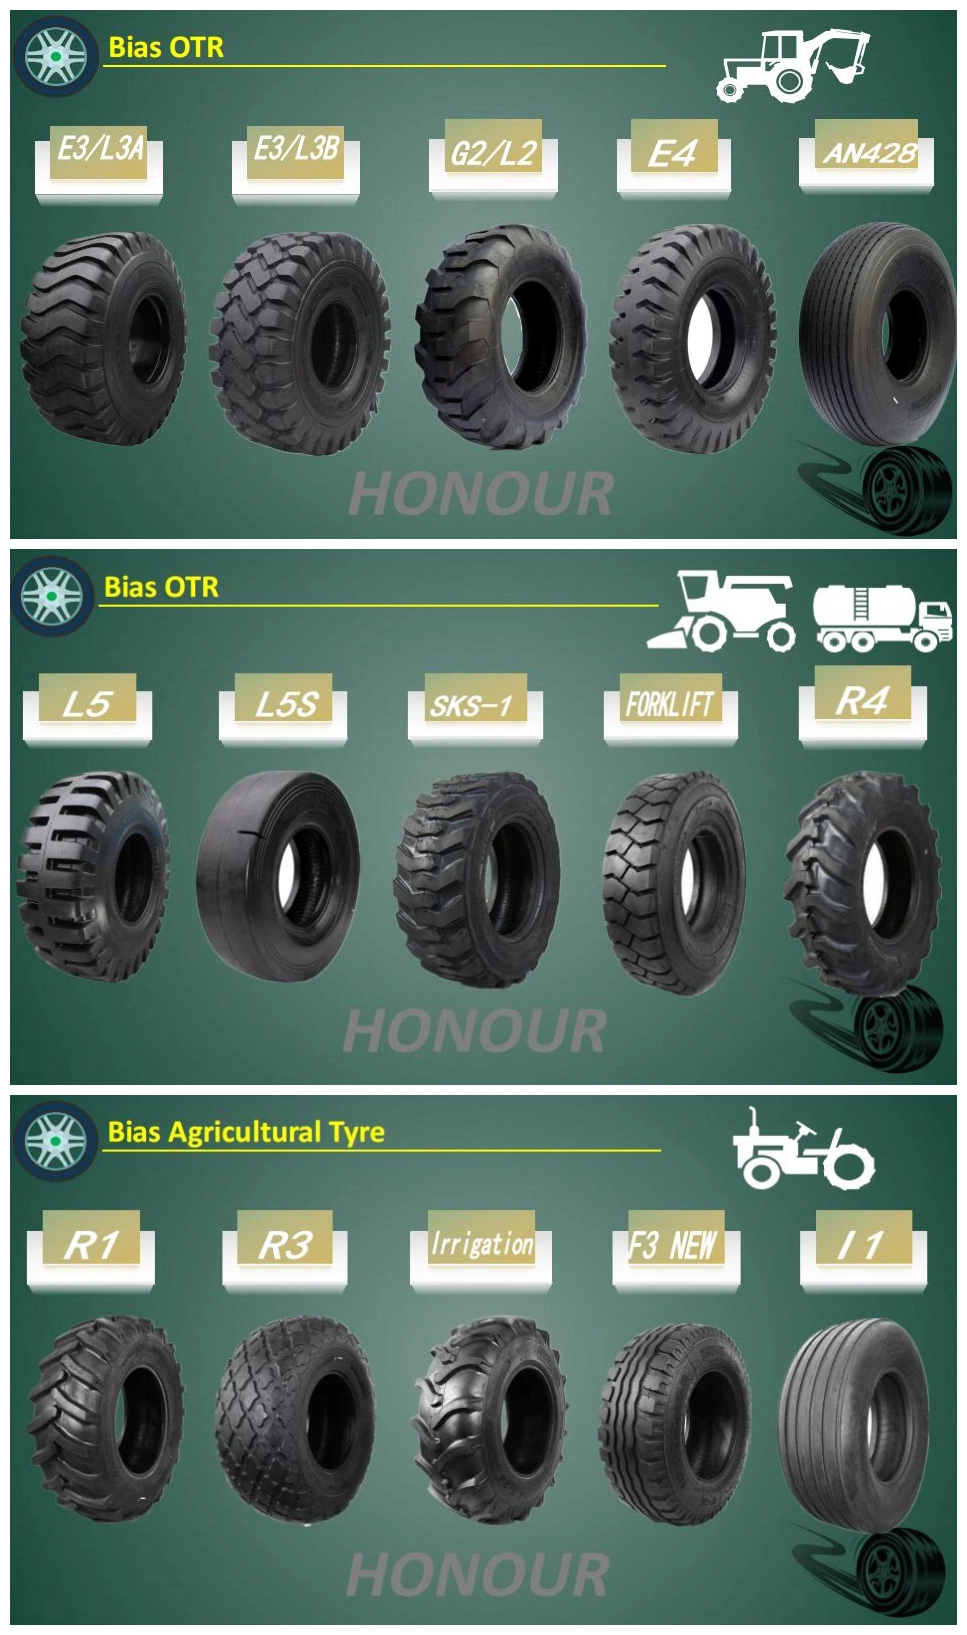 Honour Factory with R4 Backhoe Loader Tyres Agriculture Tire Industrial Tyre for Construction (16.9-24, 16.9-28, 19.5L-24)